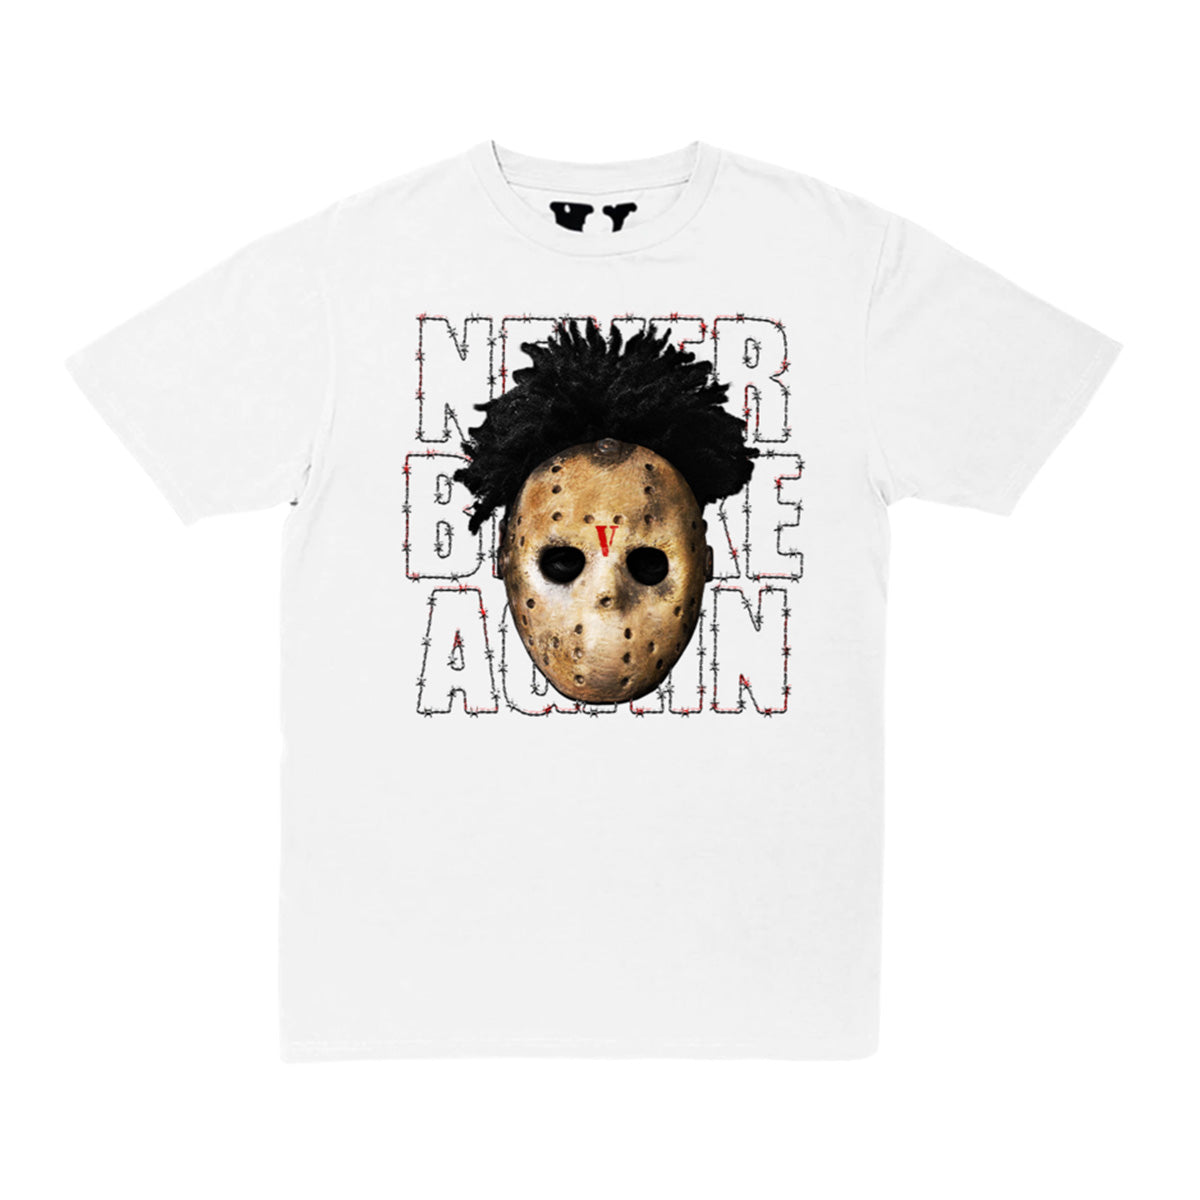 Vlone X NBA YoungBoy Haunted White Small Tee